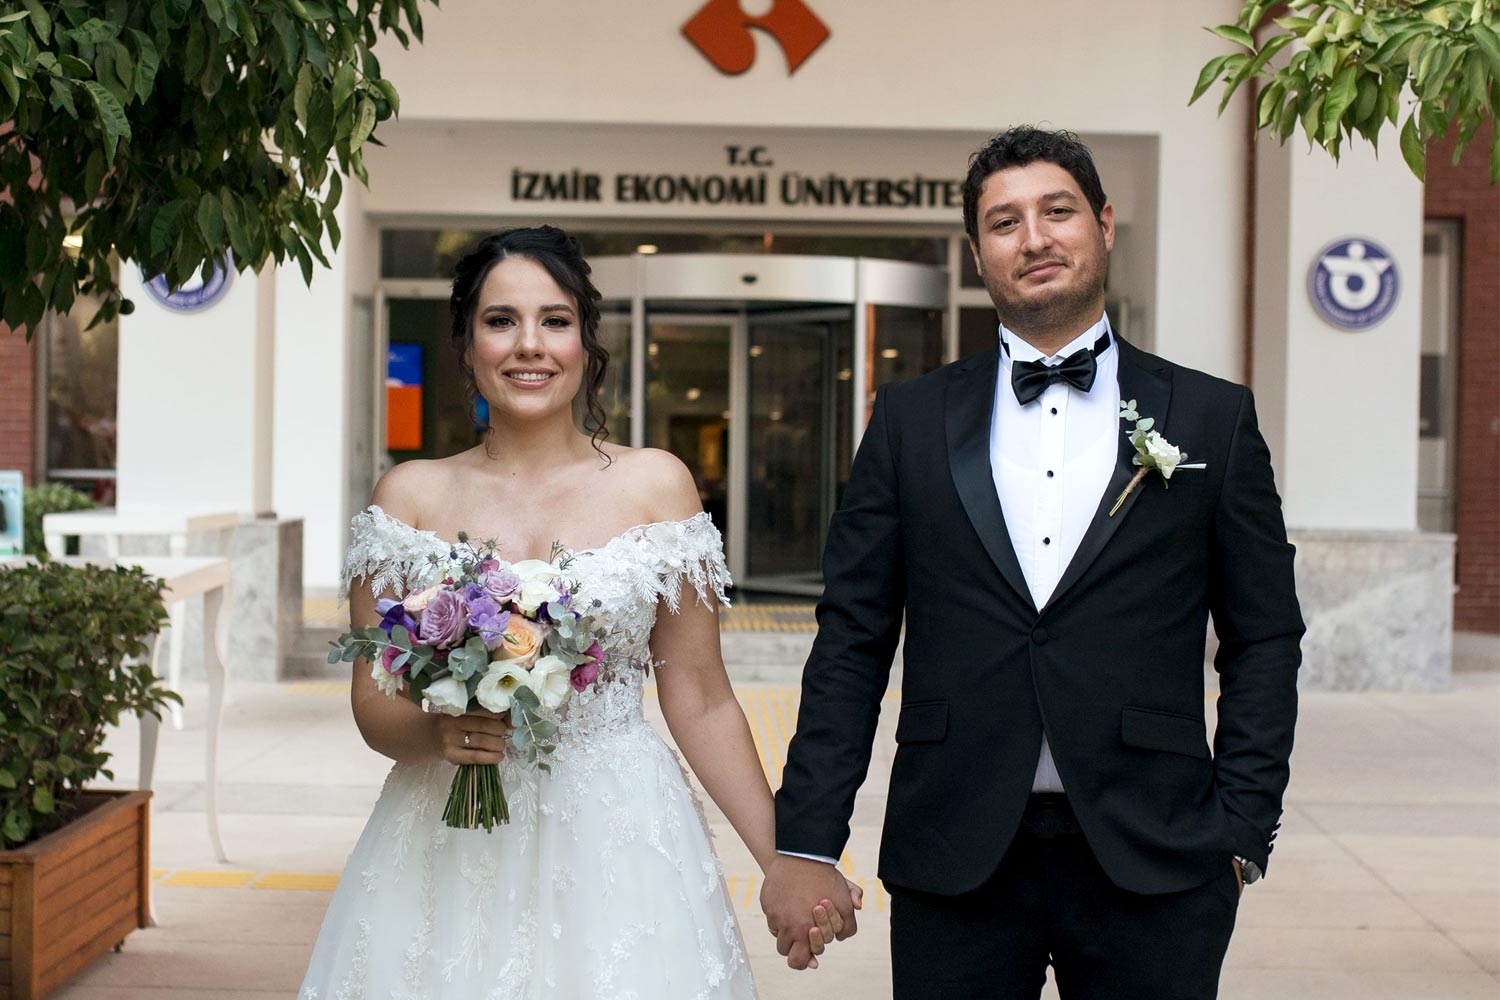 A bride and a groom on campus